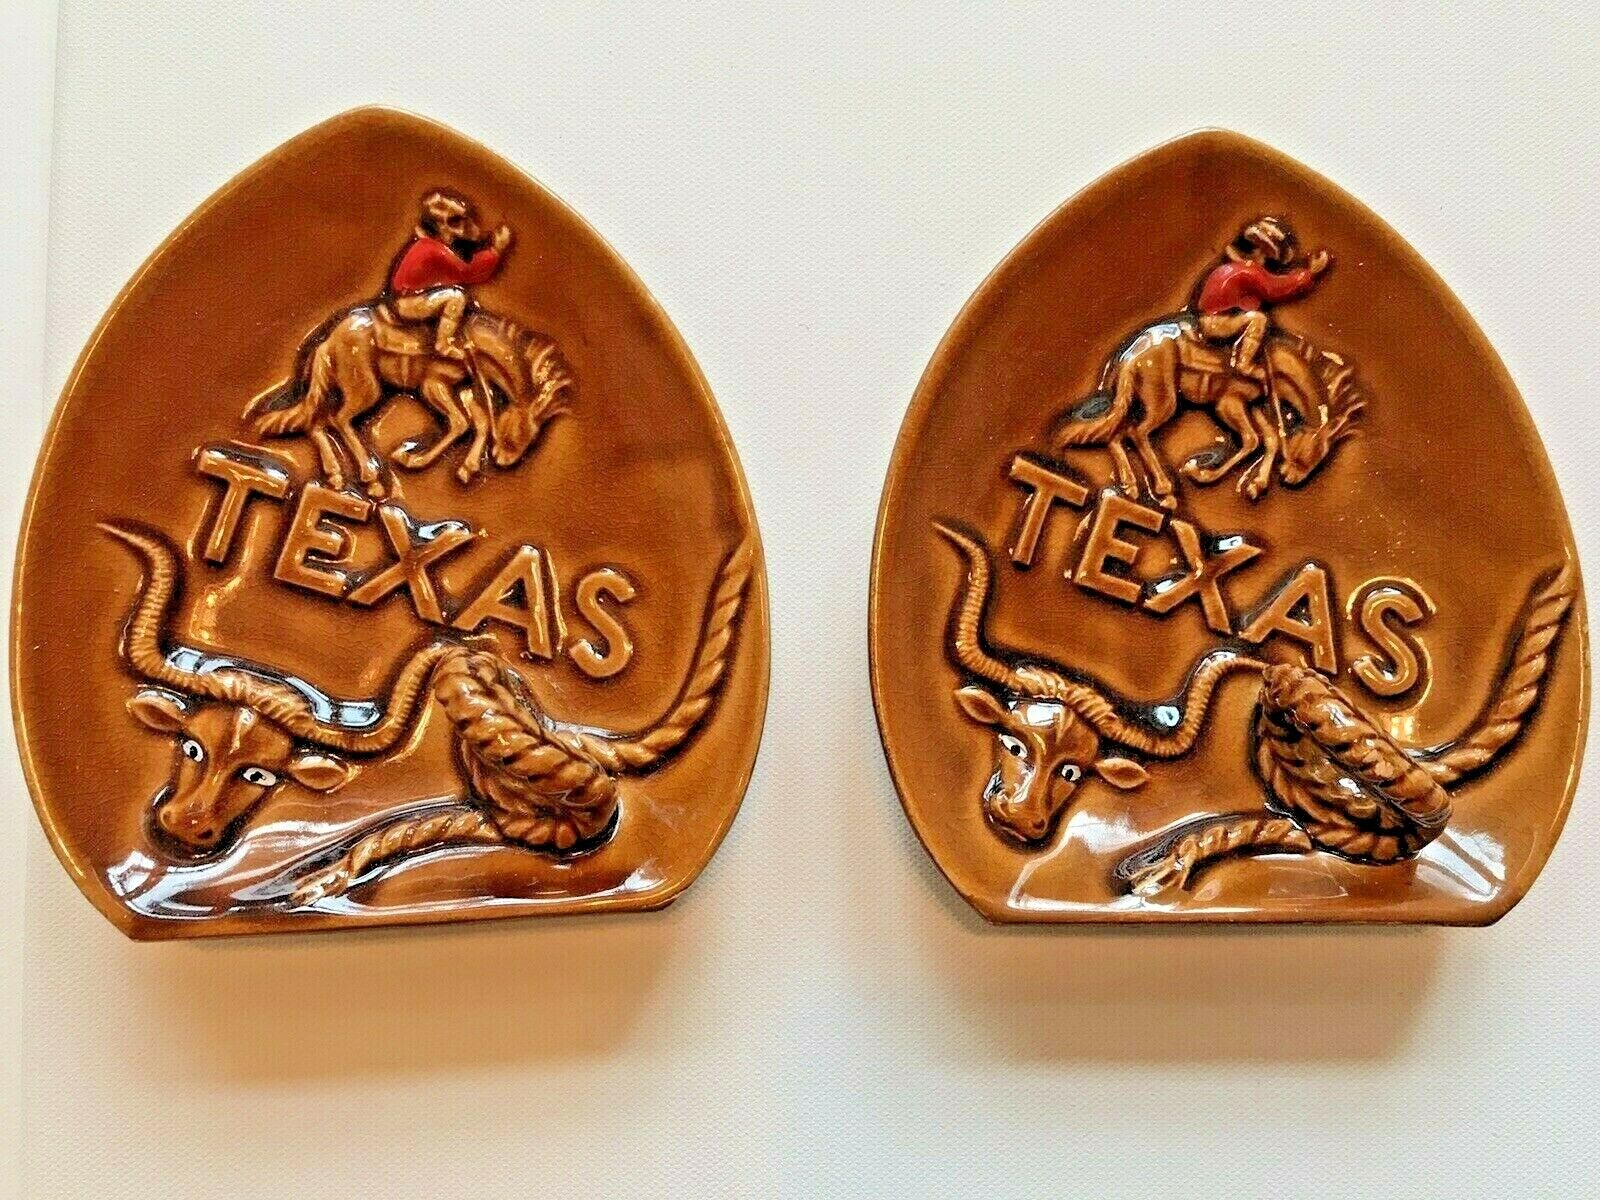 c.1950\'s Vintage Pair Texas Souvenirs Made in Japan Ashtrays/Bookends/Coin Dish?